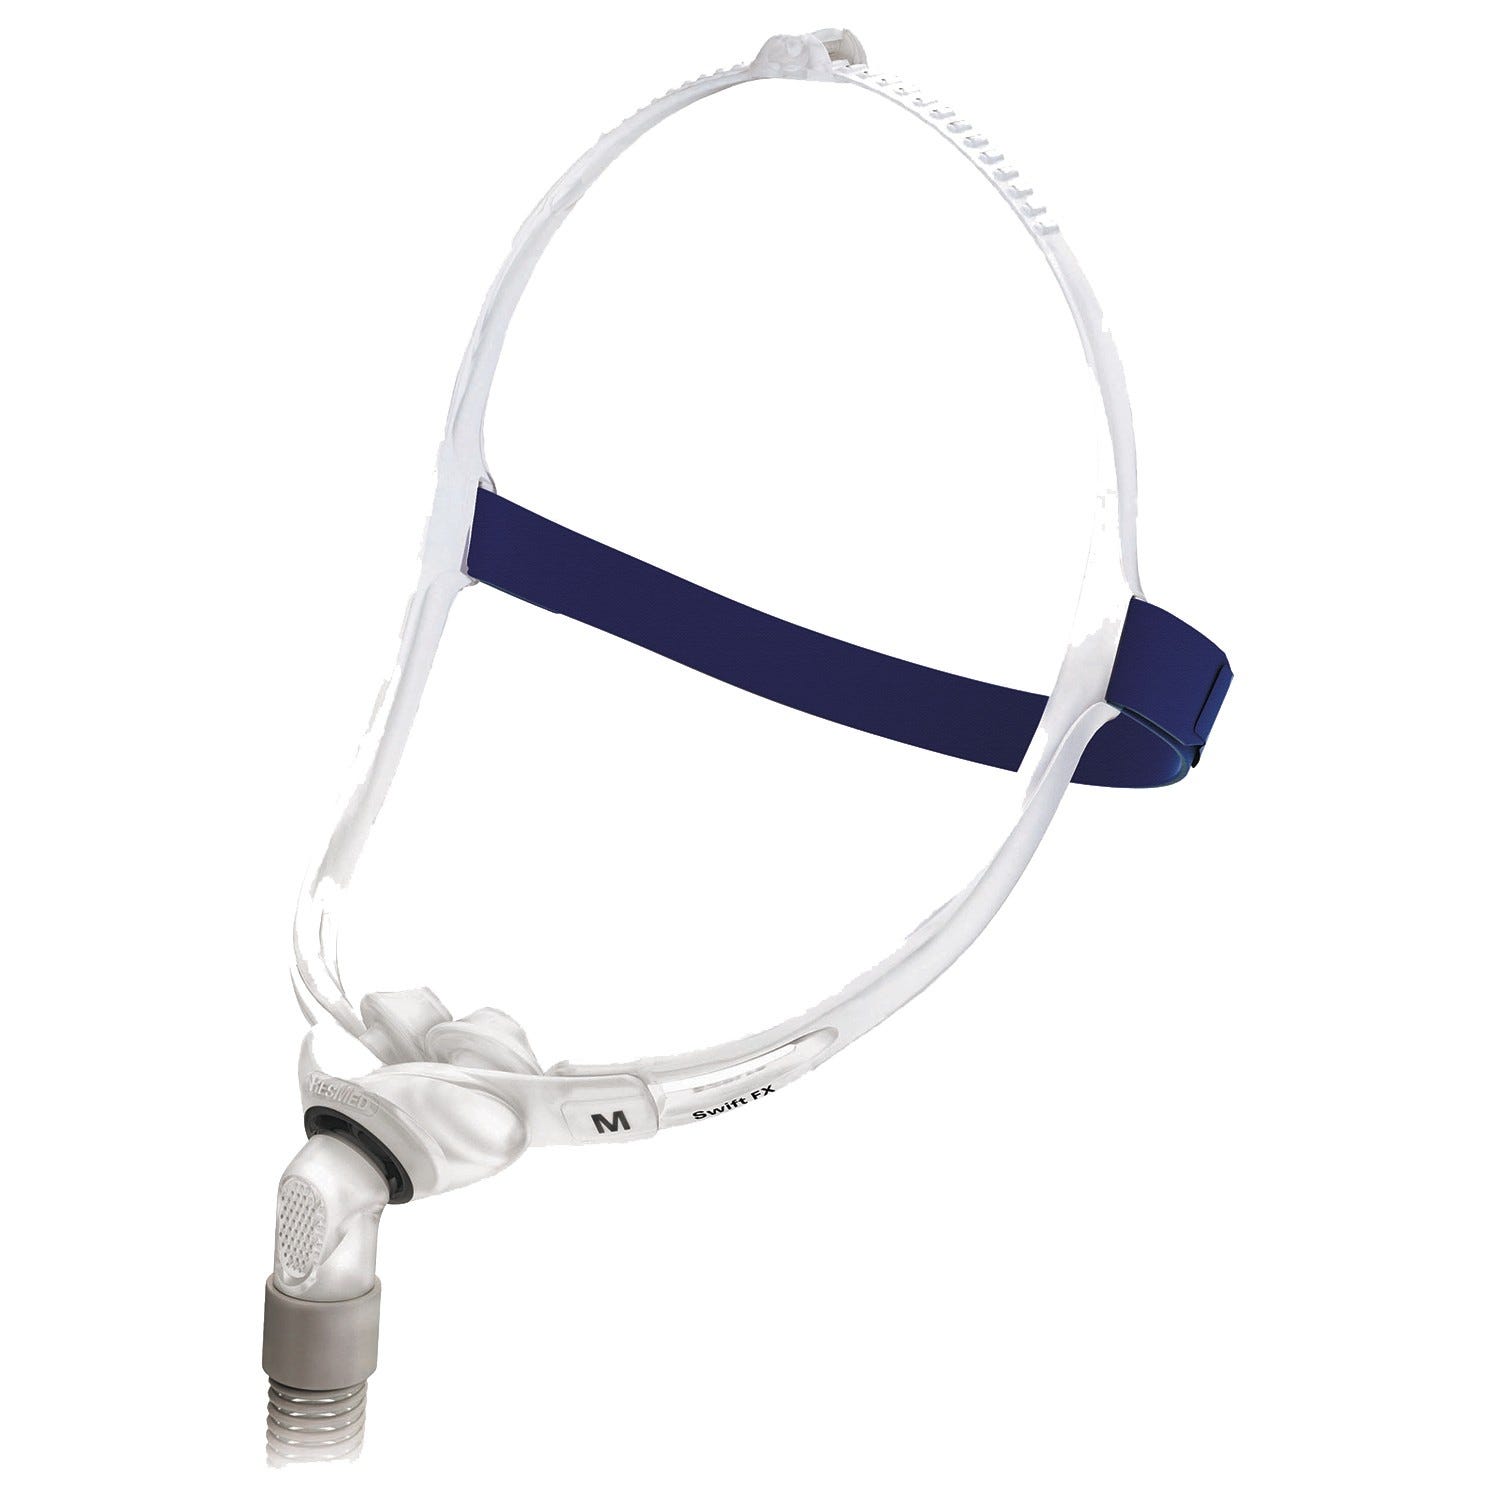 Resmed Swift Nasal Pillows CPAP Mask